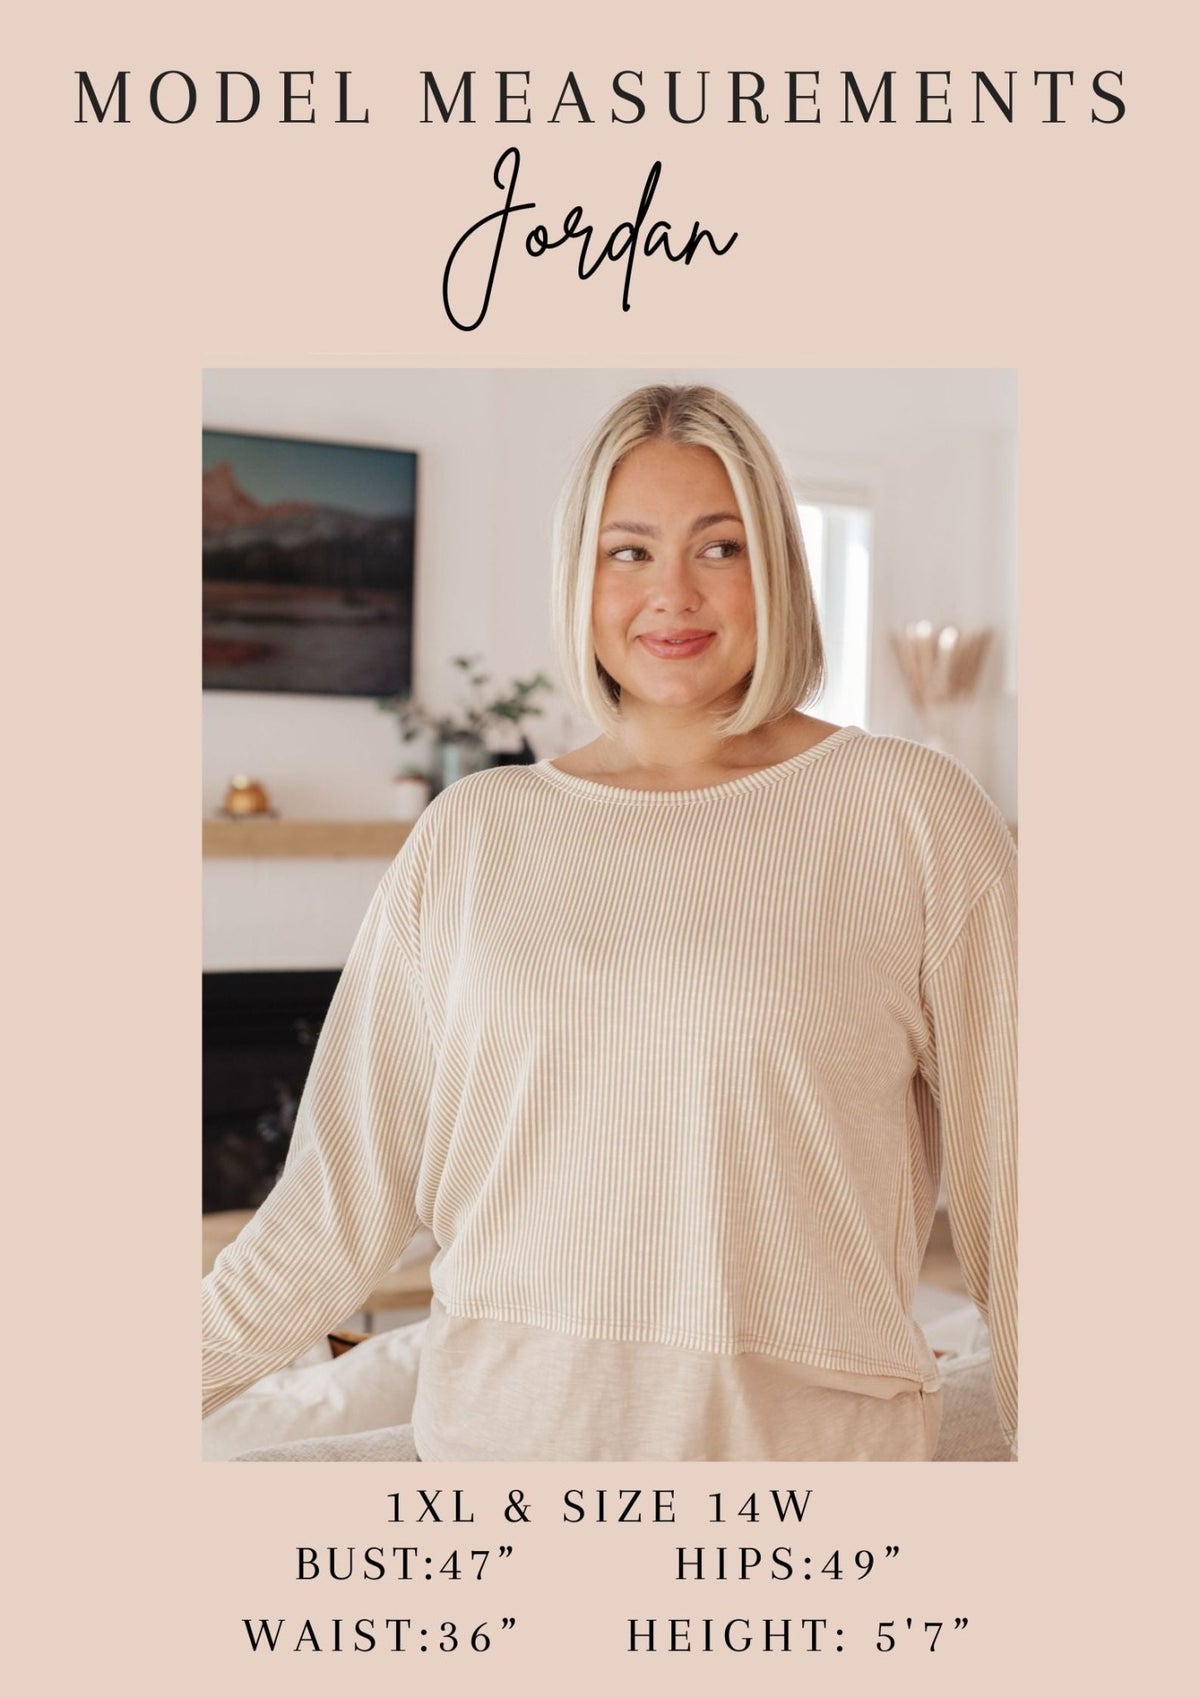 Every Waking Moment Kimono - Happily Ever Atchison Shop Co.